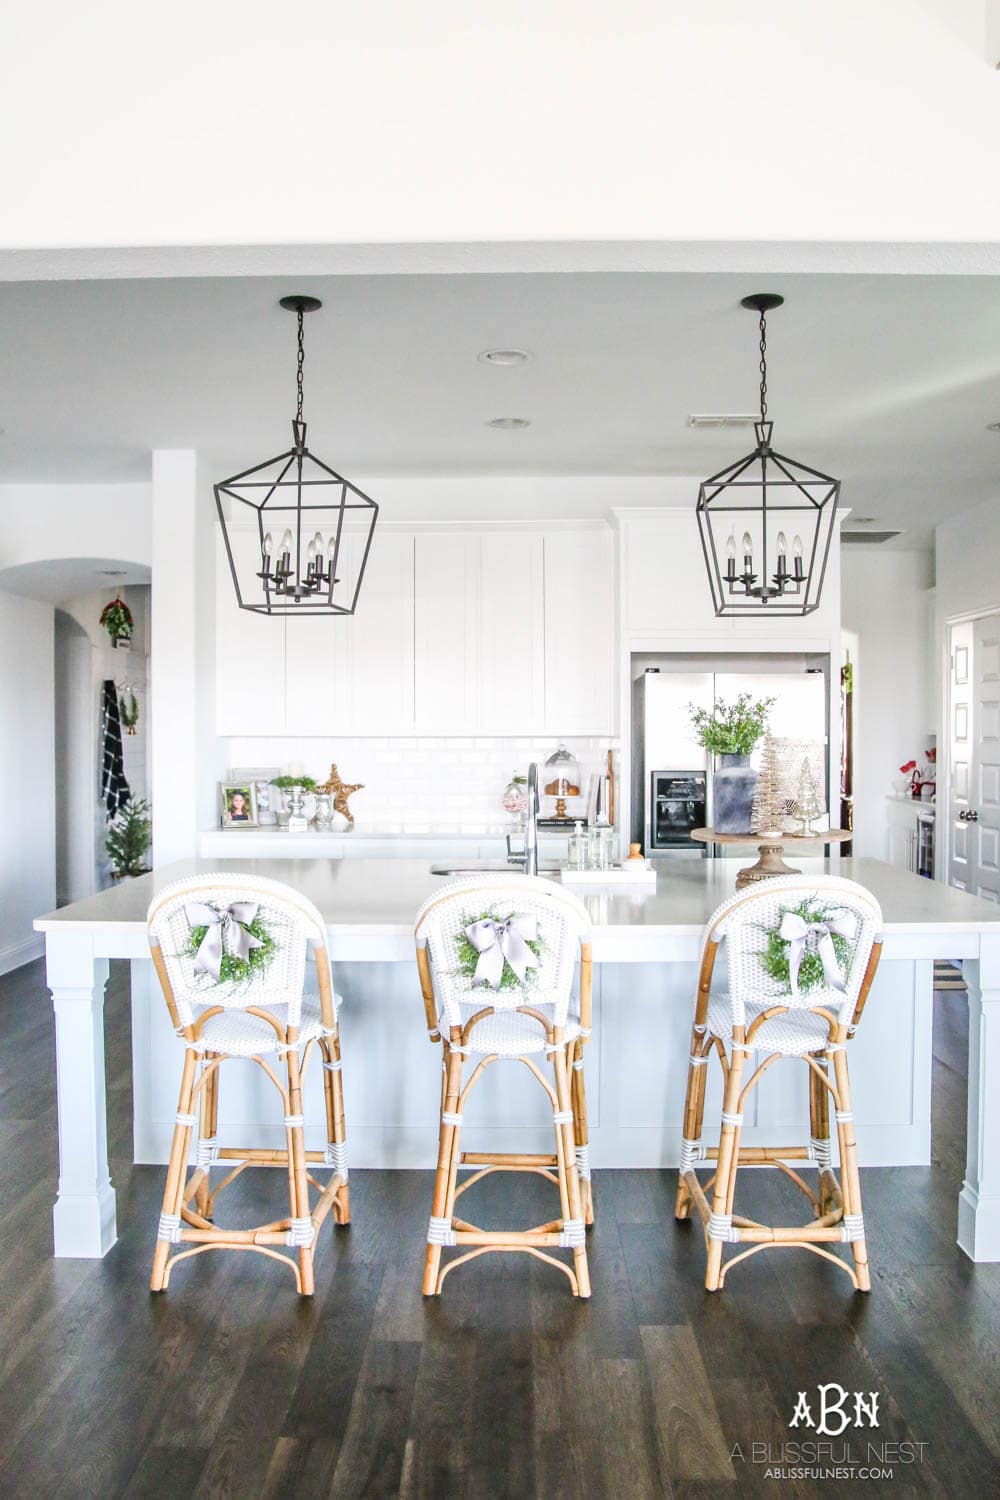 Blue and silver Christmas kitchen décor. All white kitchen with subtle holiday décor for a fresh coastal Christmas look. Mini wreaths on the backs of the barstools, beautiful bay leaf above the range. #christmaskitchen #christmashometour #holidayhometour #kitchenideas